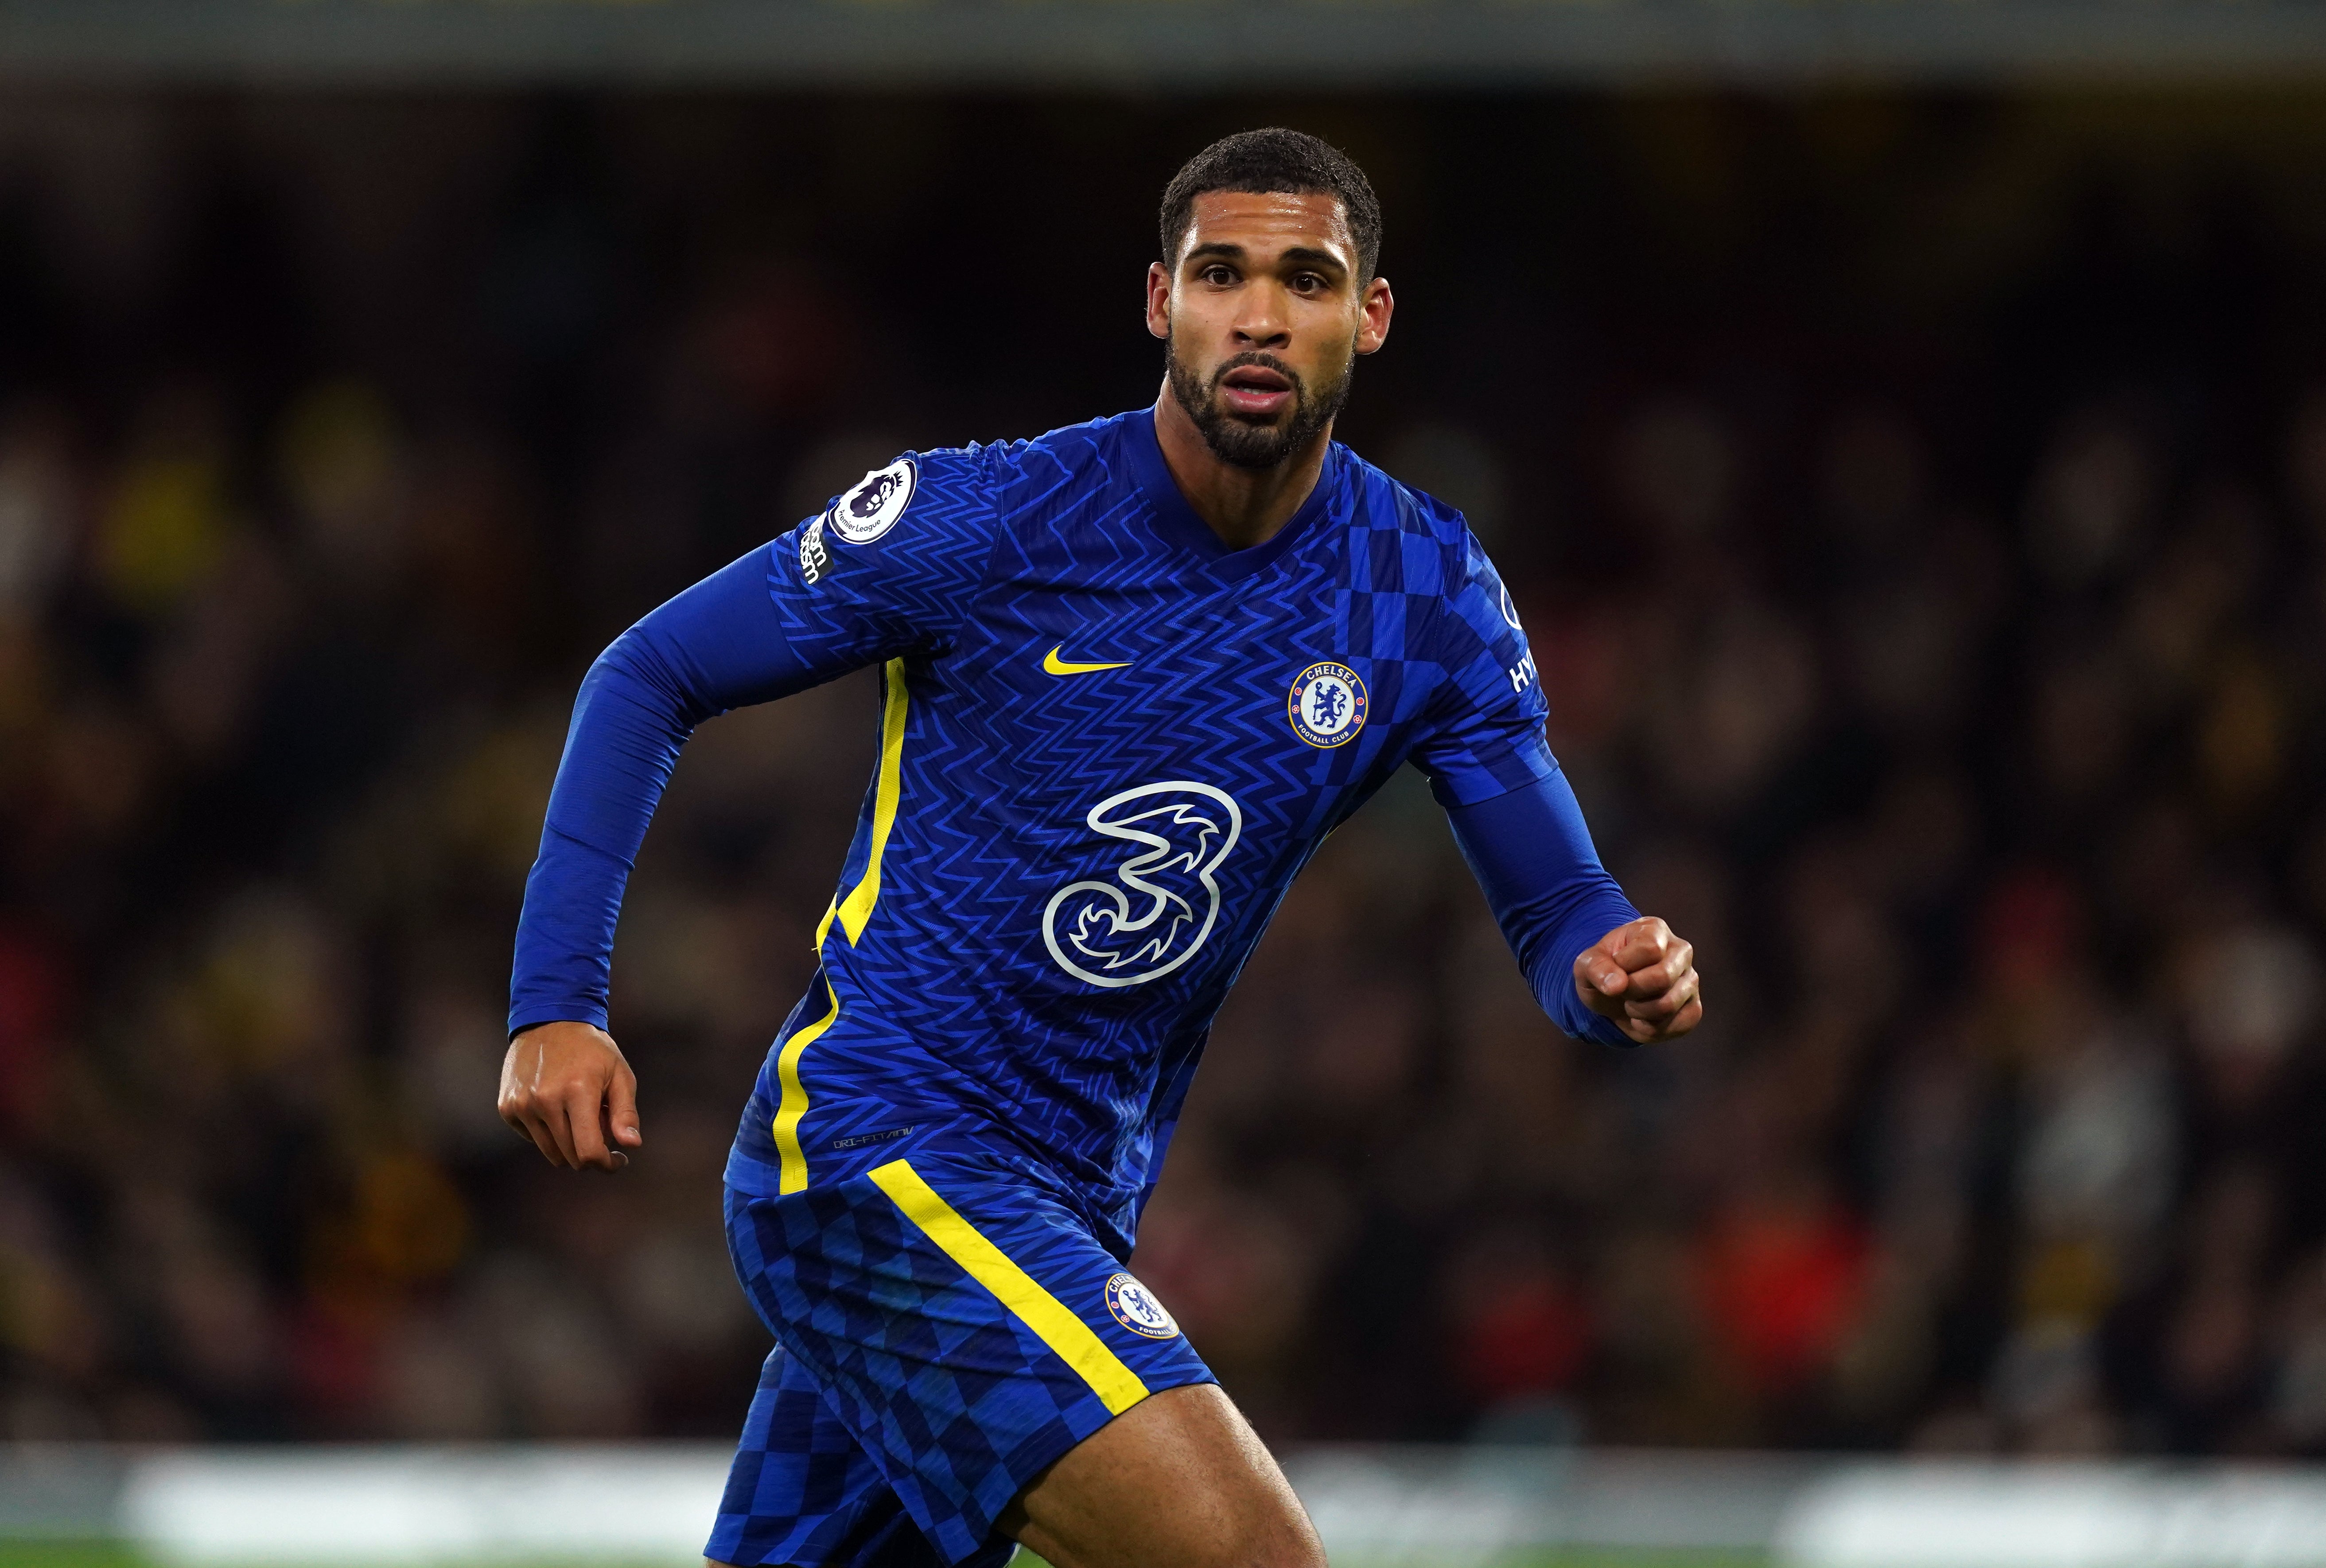 Ruben Loftus-Cheek needs to have more self-confidence according to his manager